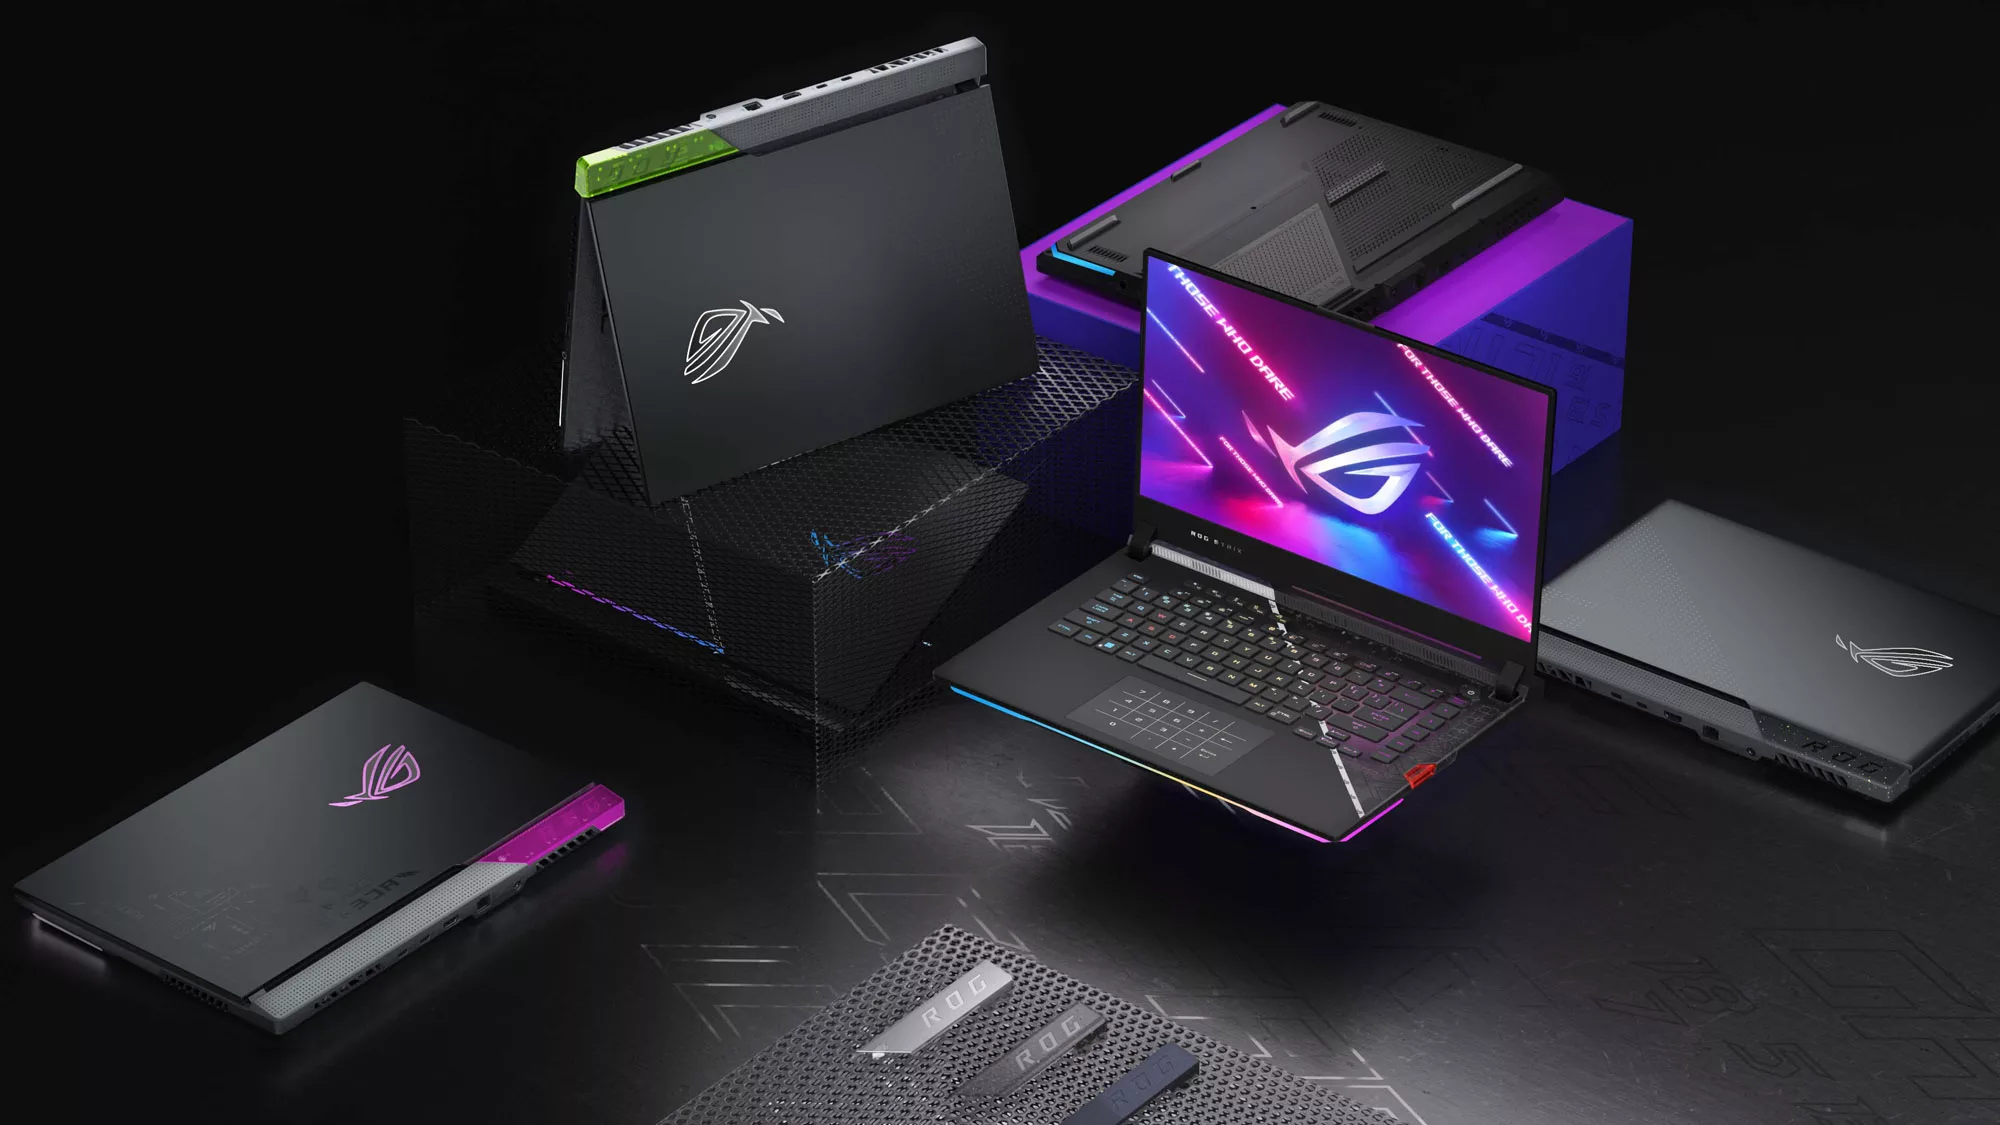 Complete Strix family photo, showing lime green and pink models, including shots of the top and bottom of the laptops.